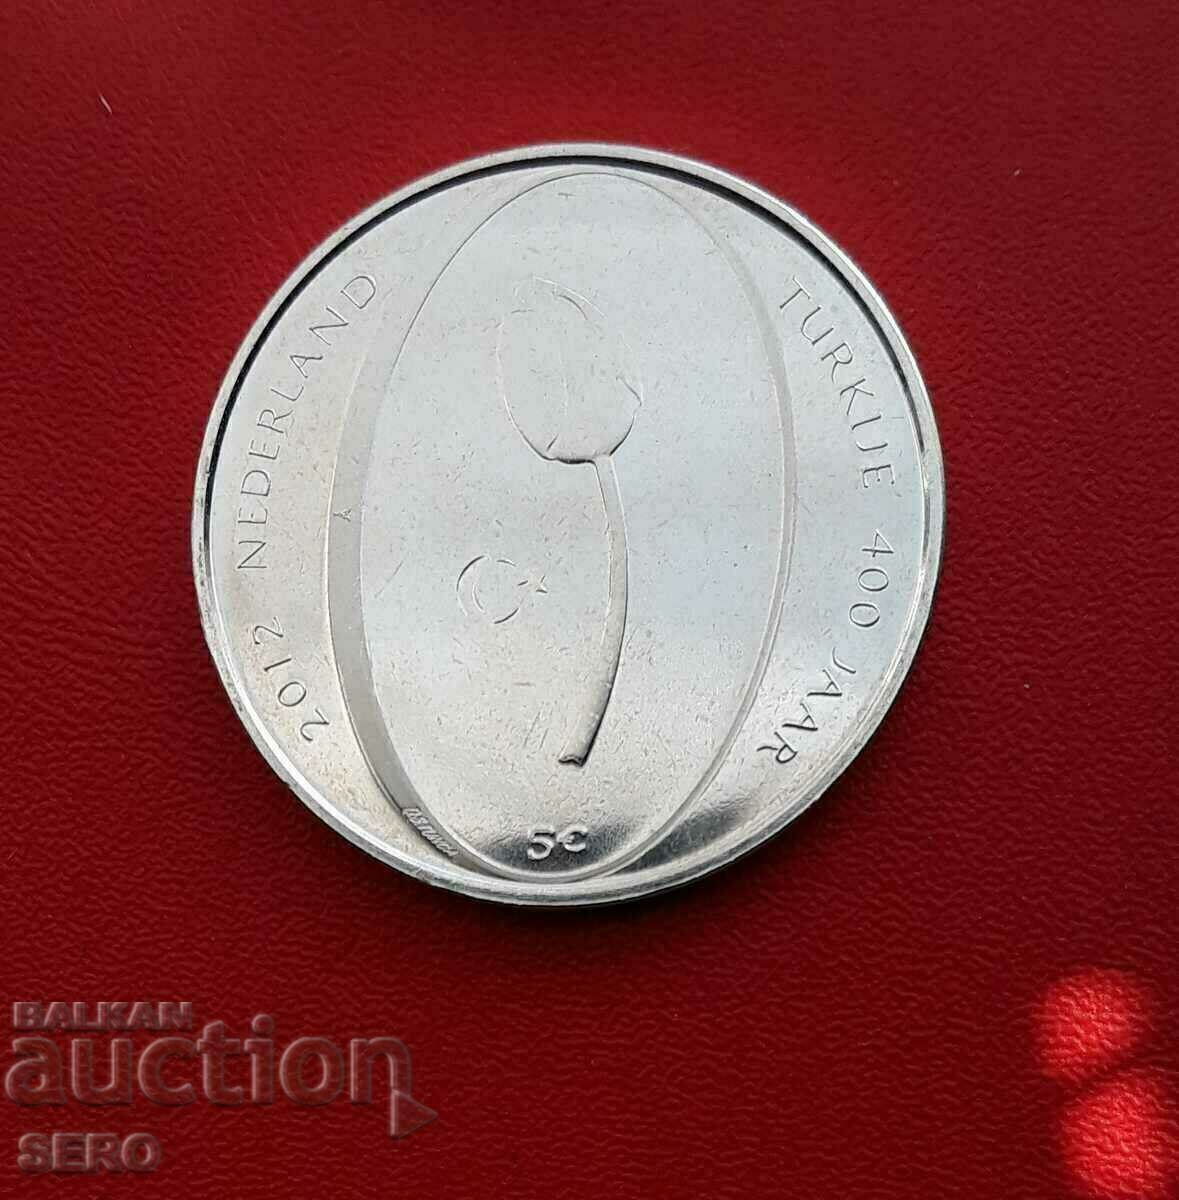 Netherlands-5 euro 2012-silver plated